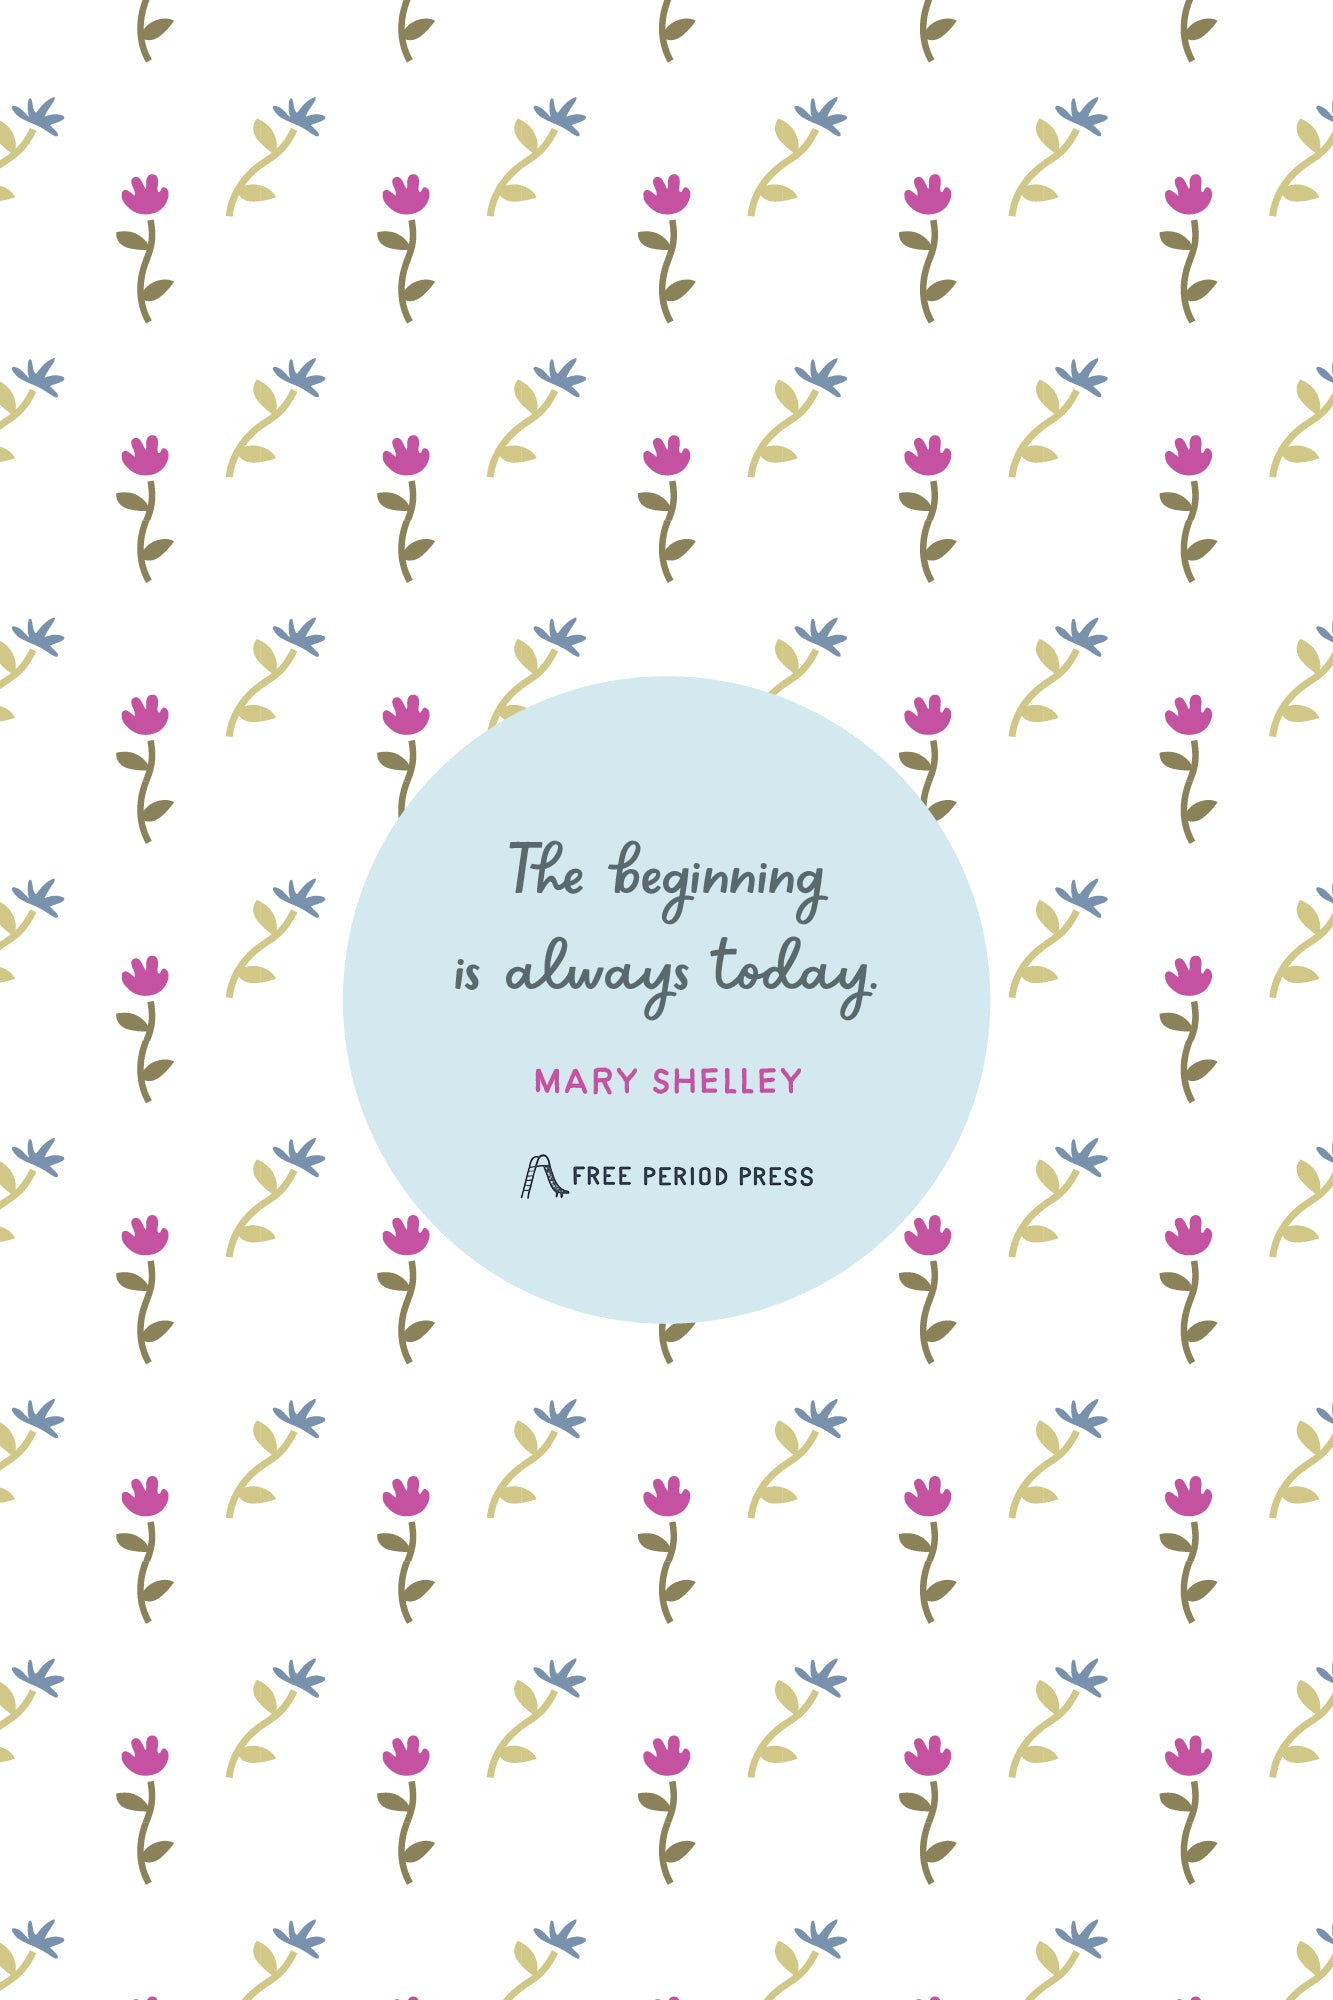 The beginning is always today | Mary Shelley Quote | Phone Wallpaper | Free Period Press